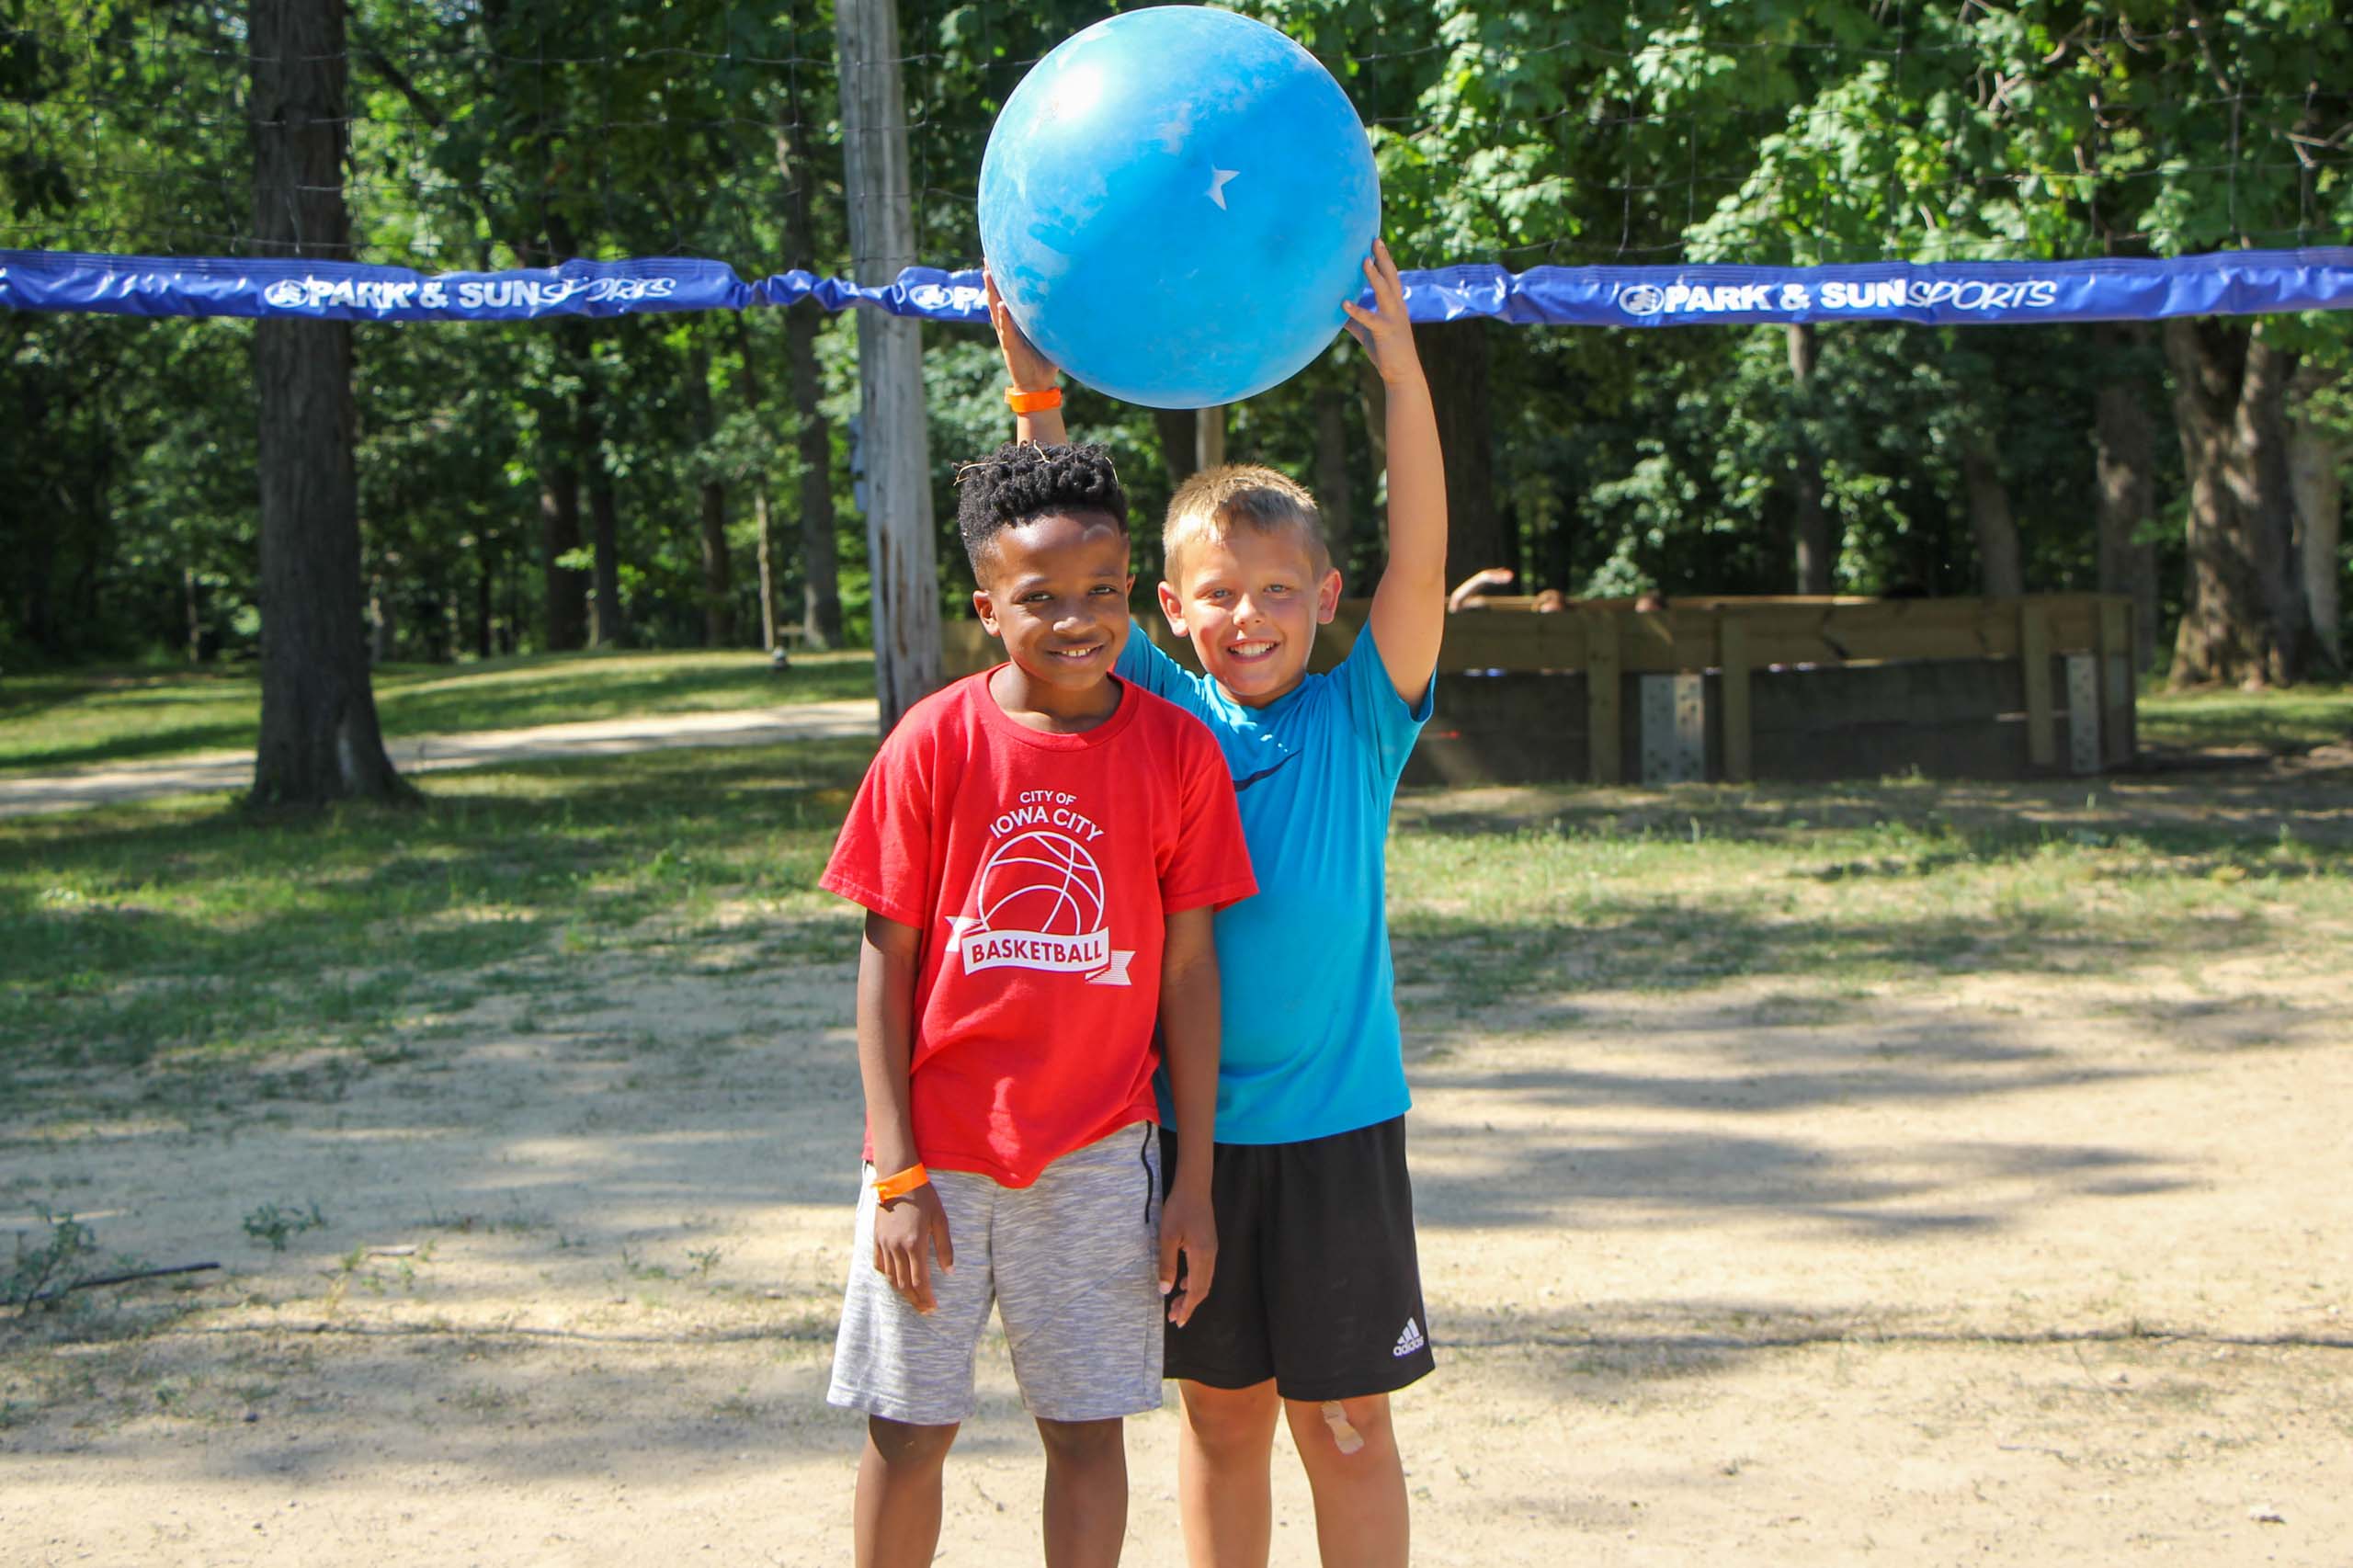 Two kids attending summer camp in Iowa playing with a blue ball.